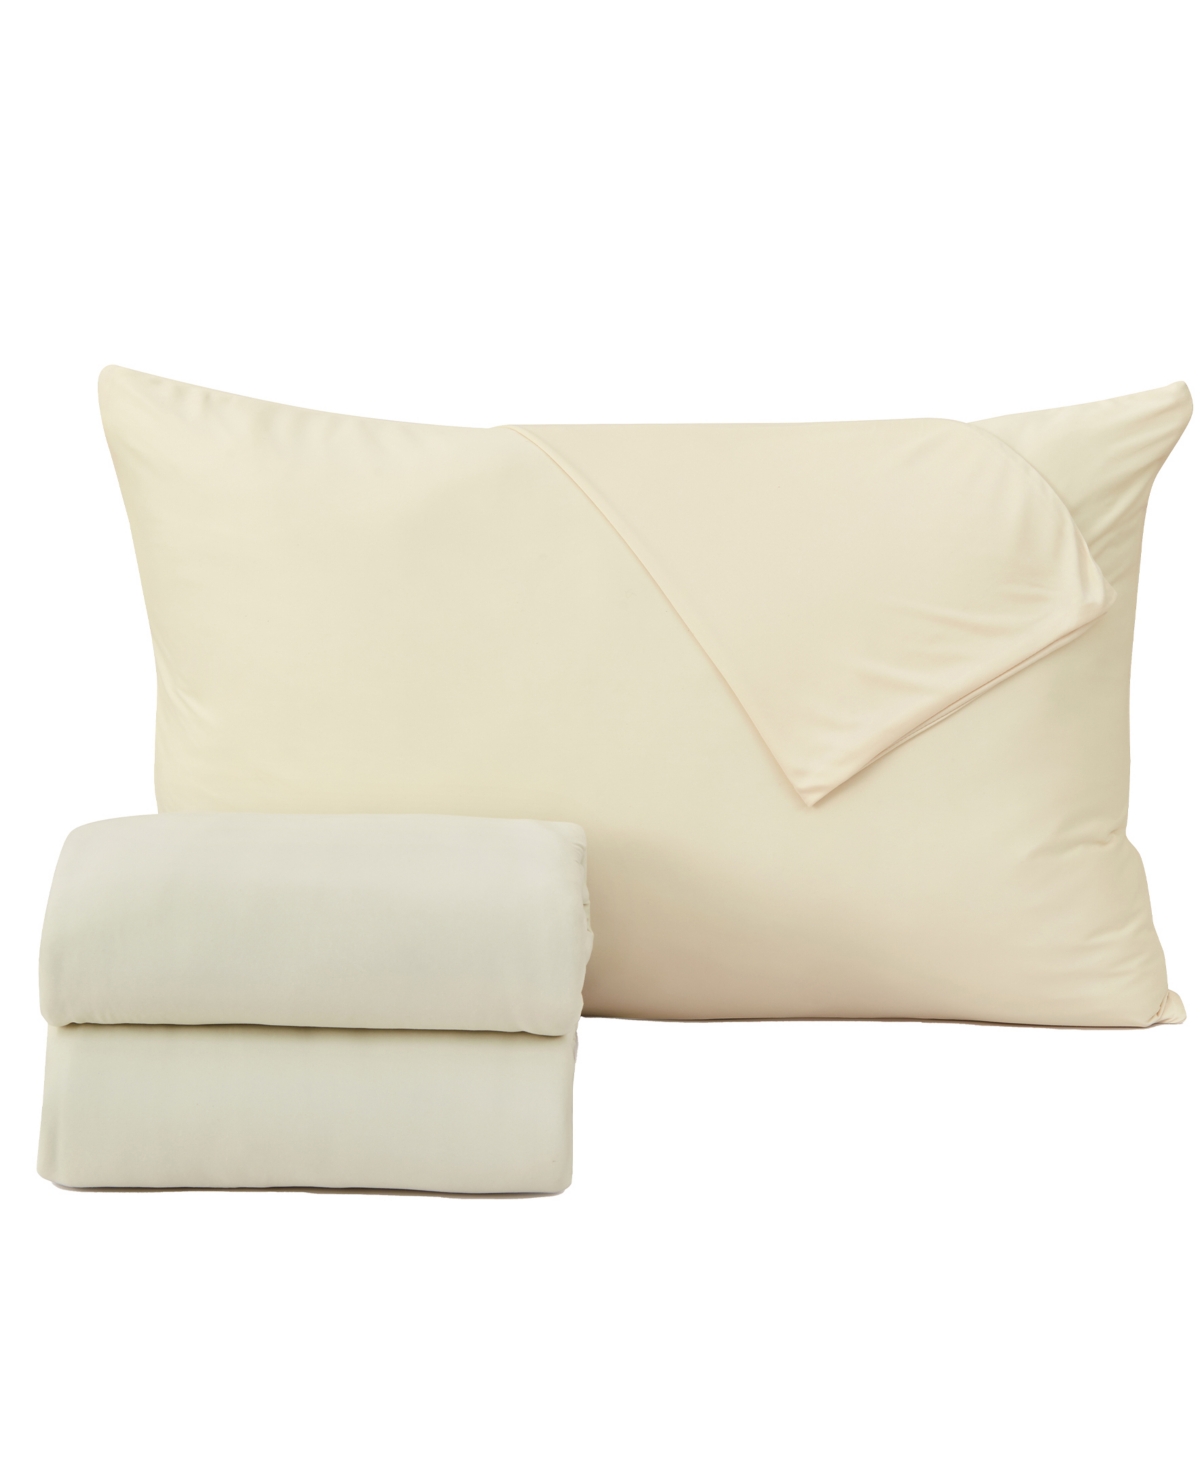 Premium Comforts Performance Cooling Super Soft Polyester 4 Piece Sheet Set, Full In Natural